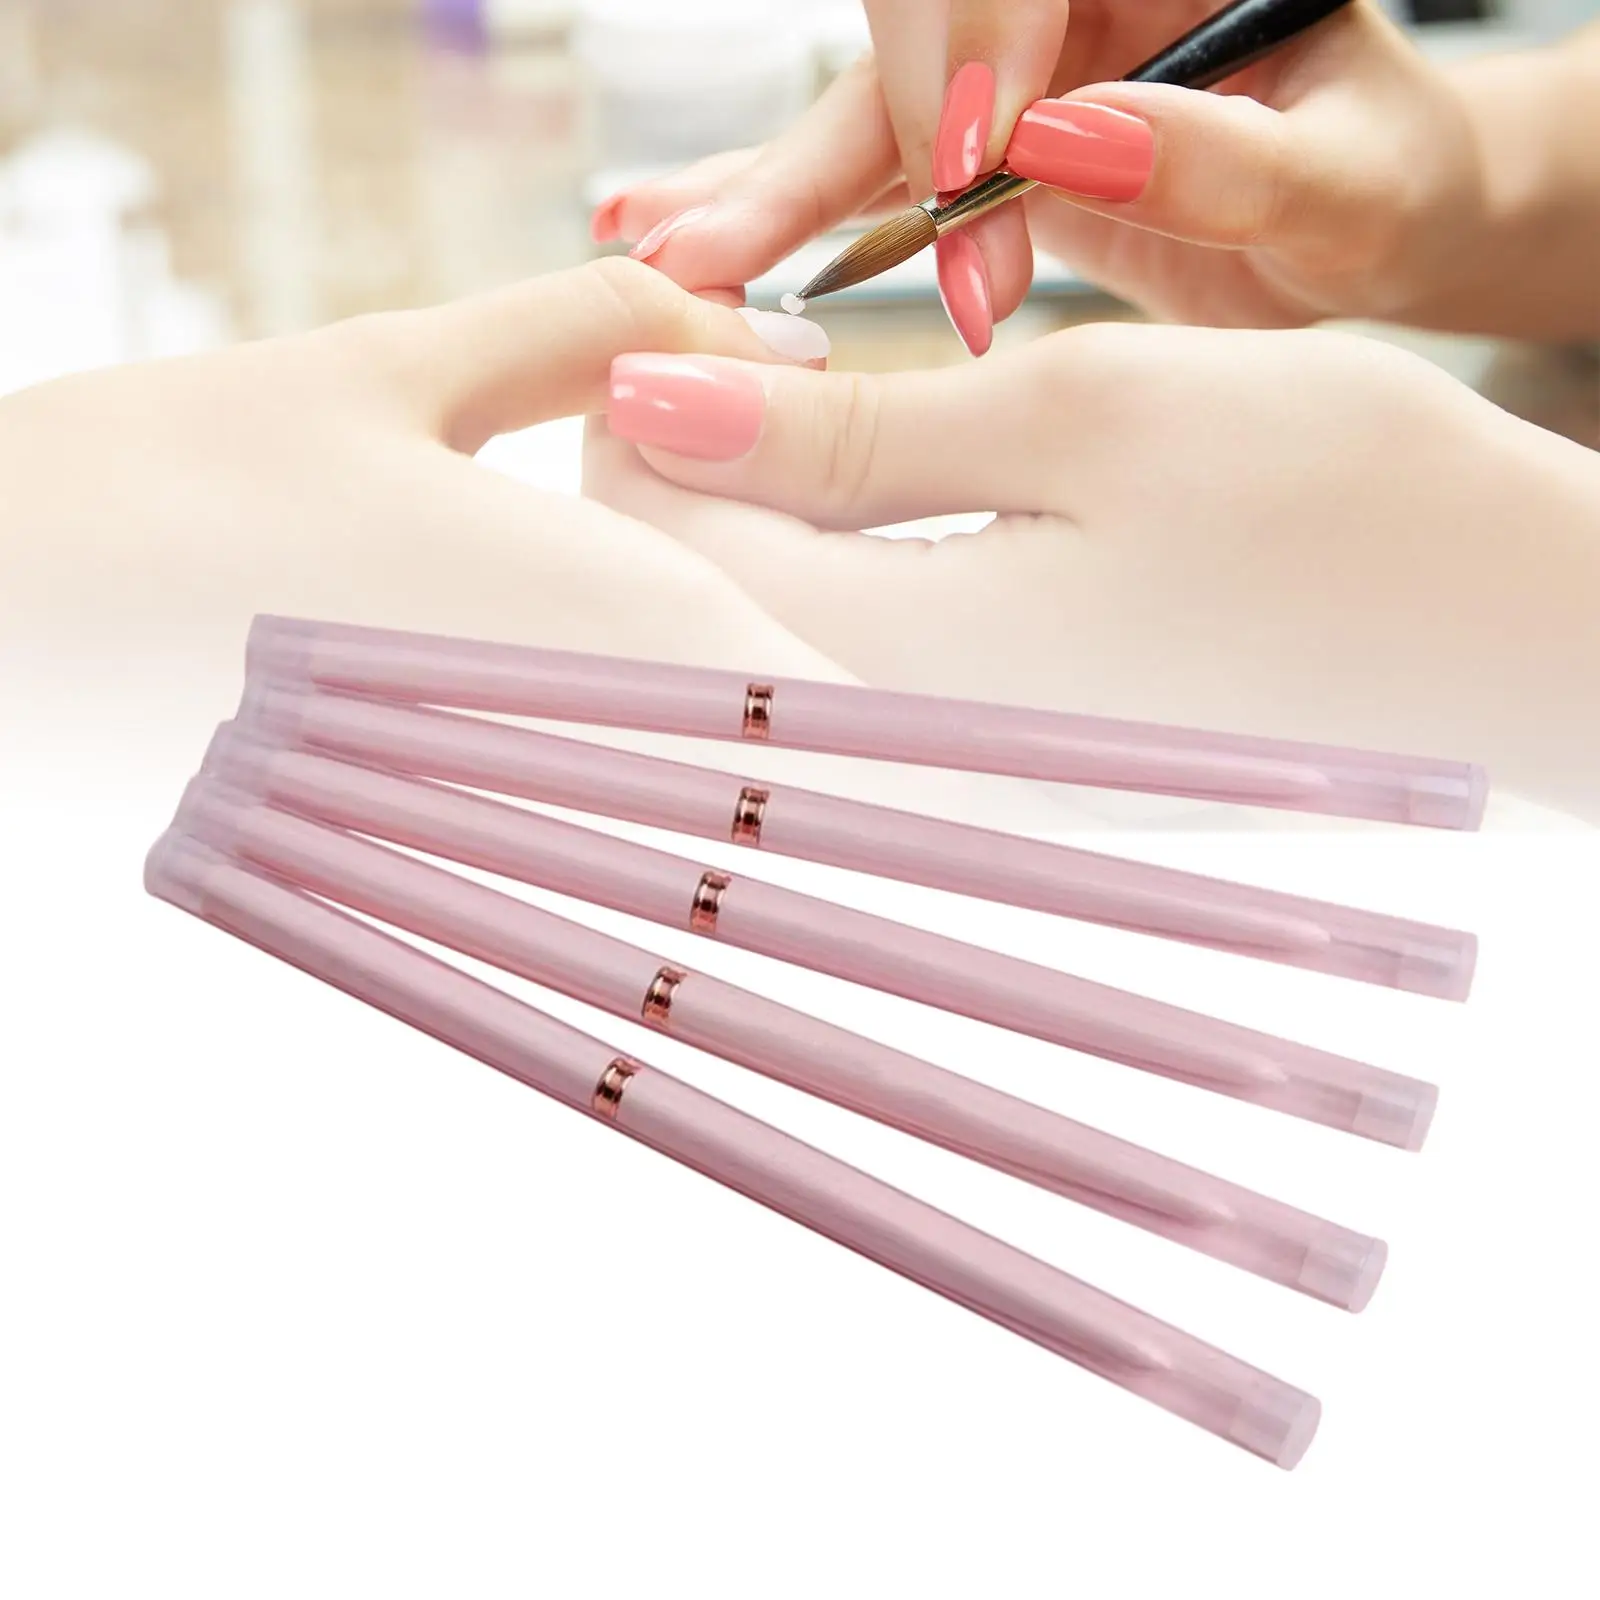 5 Pieces Nail Art Brushes Set Nail Art Painting Brushes Nail Design Brushes for Pulling Lines Delicate Coloring Fine Drawing